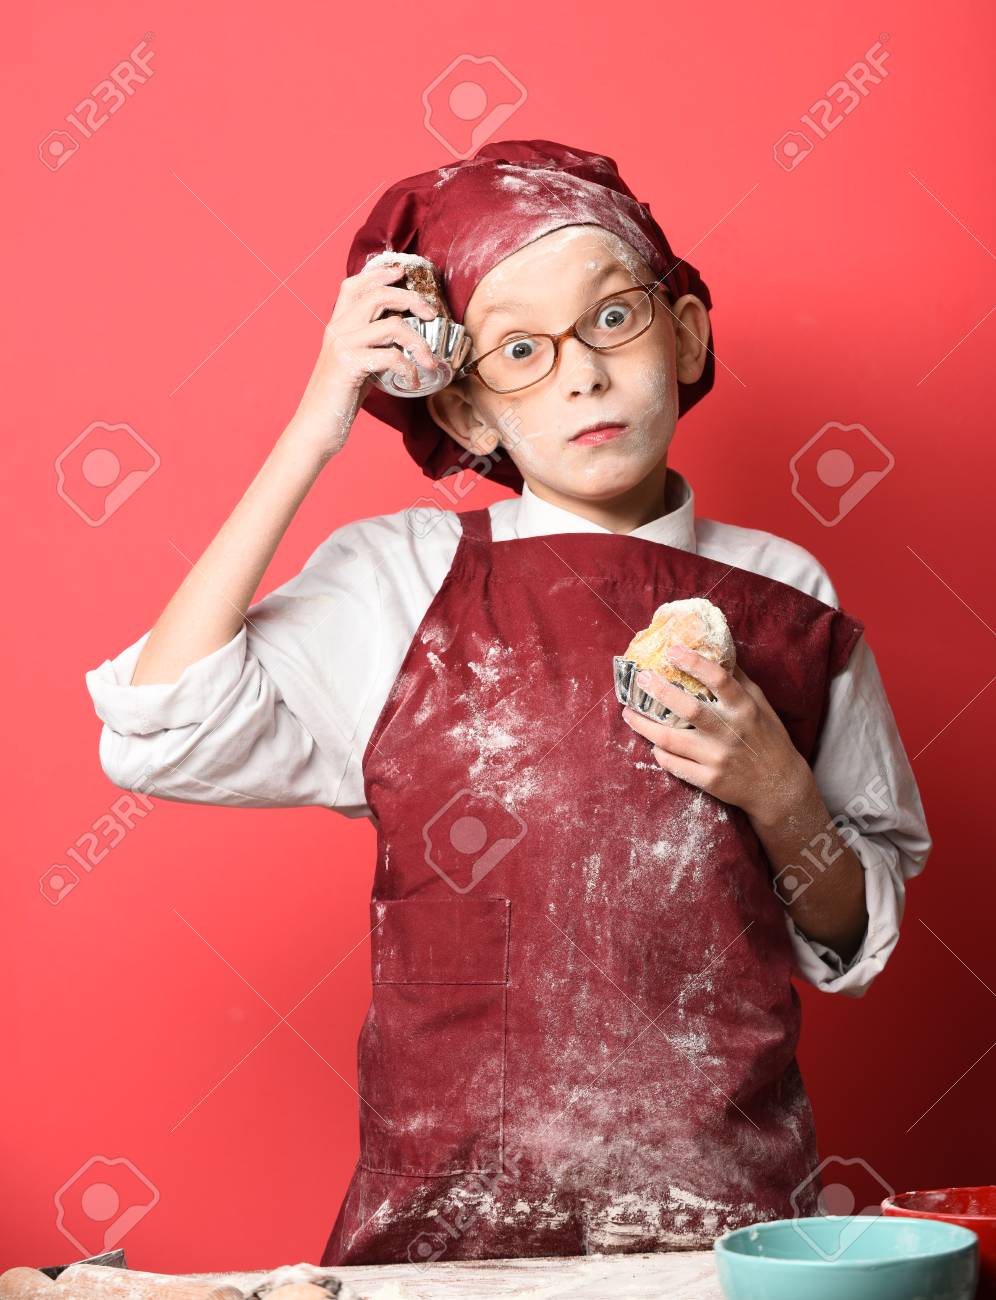 Young Boy Cute Cook Chef In Uniform And Hat On Stained Face Flour